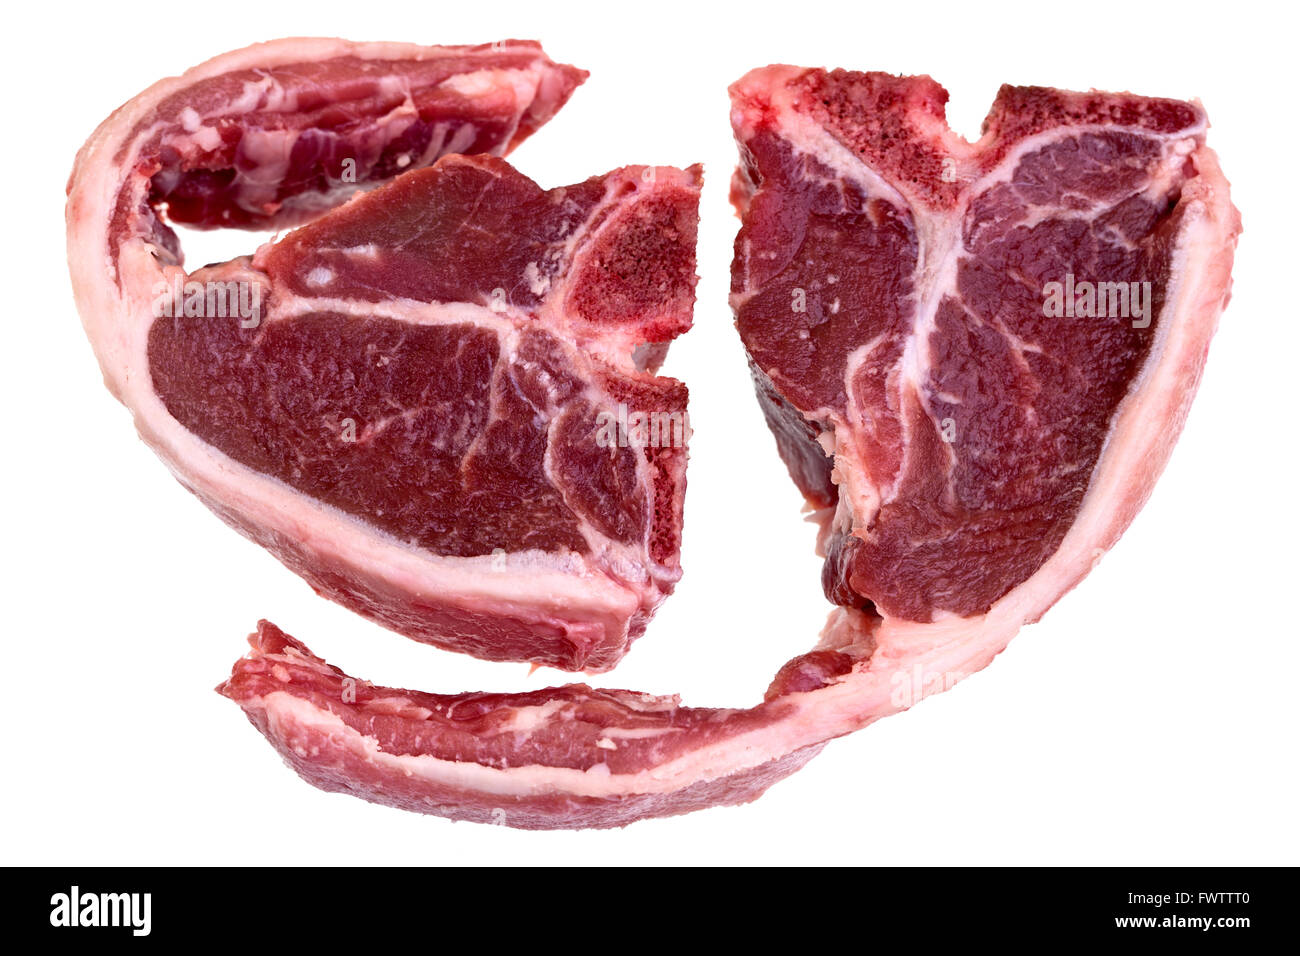 Raw lamb loin chops with fat around the meat isolated over white background Stock Photo